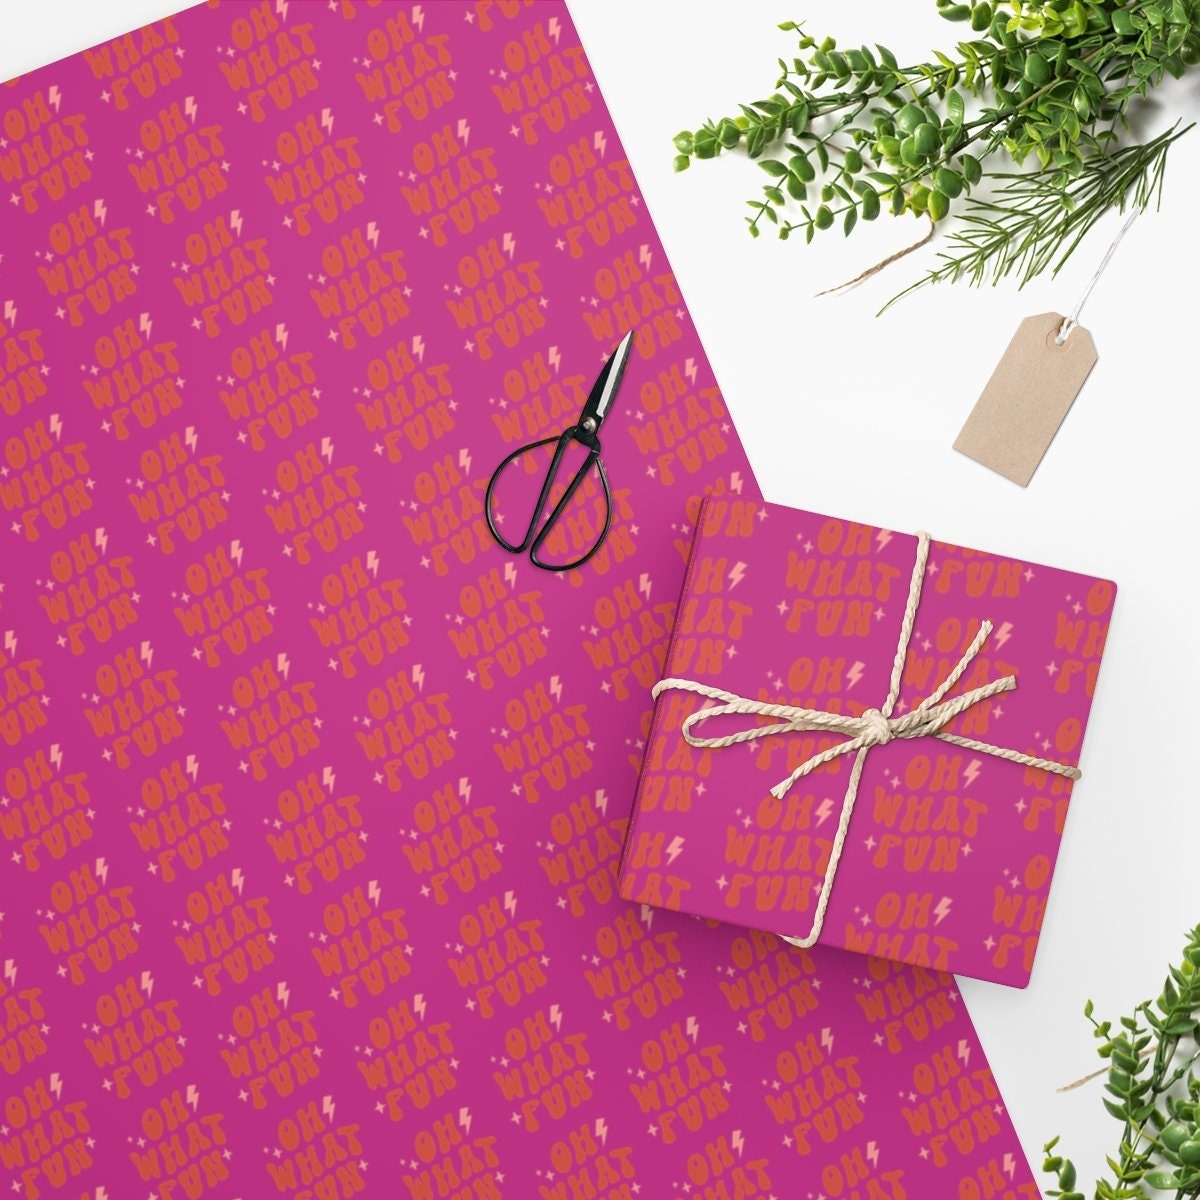 Hot PINK Floral Tissue Paper, Gift Wrapping Paper, Cute Tissue